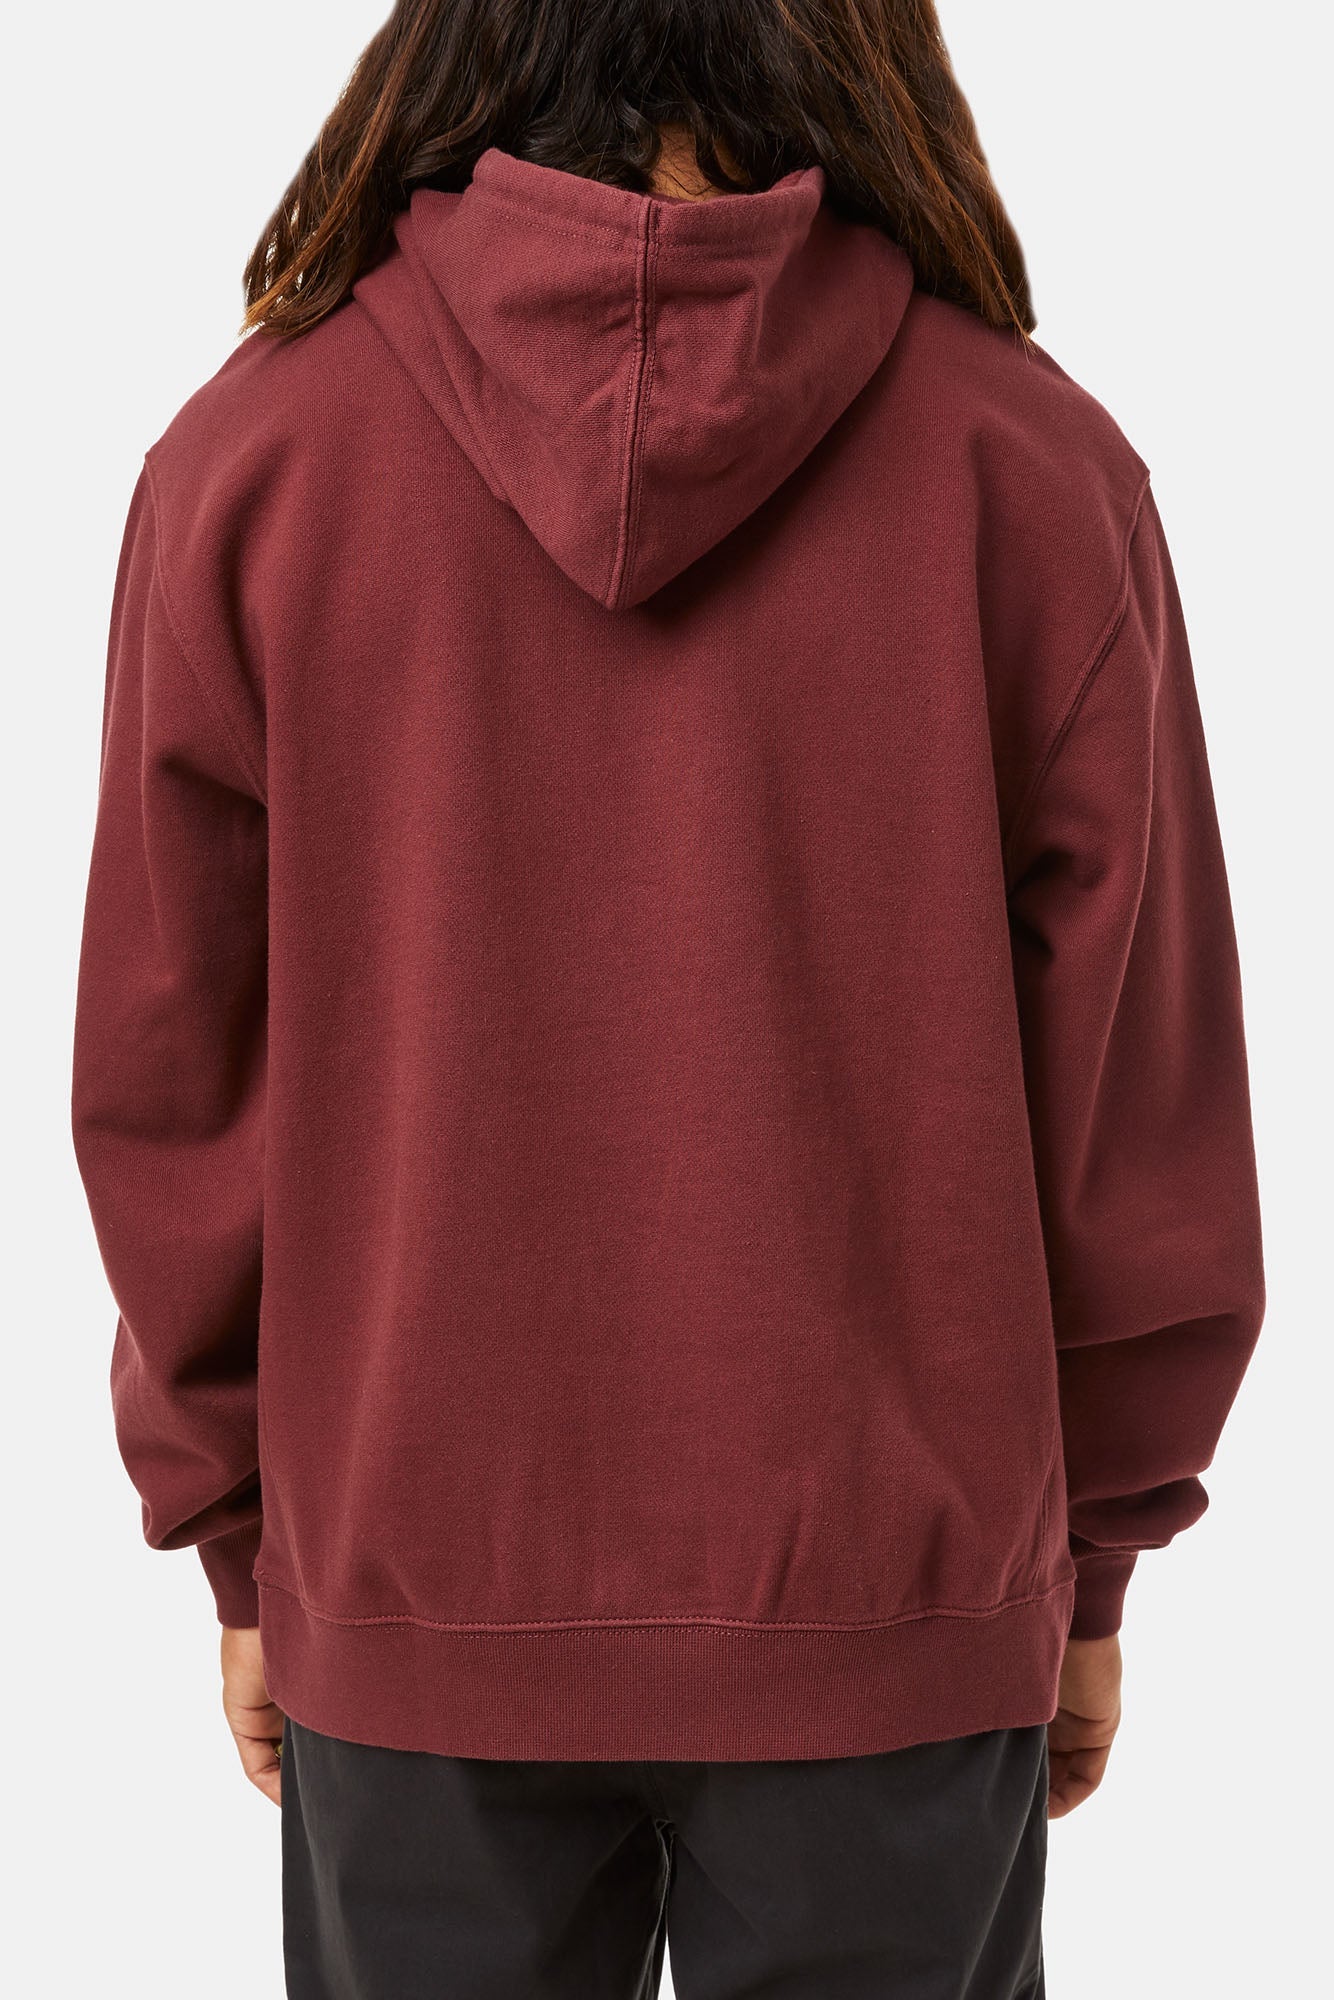 Katin  Embroidered Mineral Hoodie - Kelp Red back